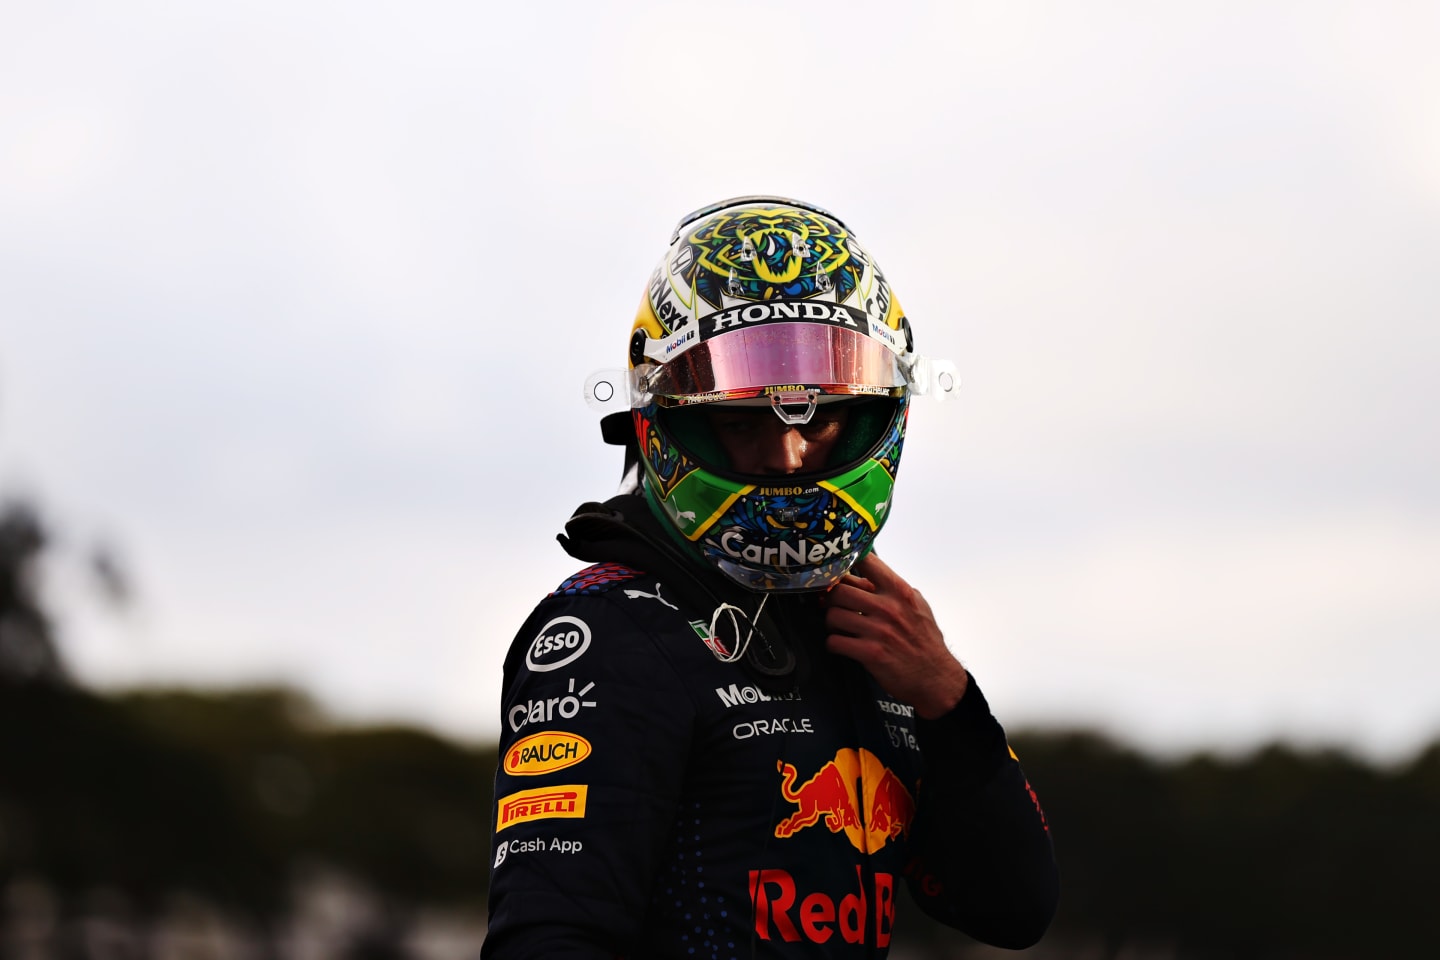 SAO PAULO, BRAZIL - NOVEMBER 13: Second placed Max Verstappen of Netherlands and Red Bull Racing looks on in parc ferme during the sprint ahead of the F1 Grand Prix of Brazil at Autodromo Jose Carlos Pace on November 13, 2021 in Sao Paulo, Brazil. (Photo by Lars Baron/Getty Images)